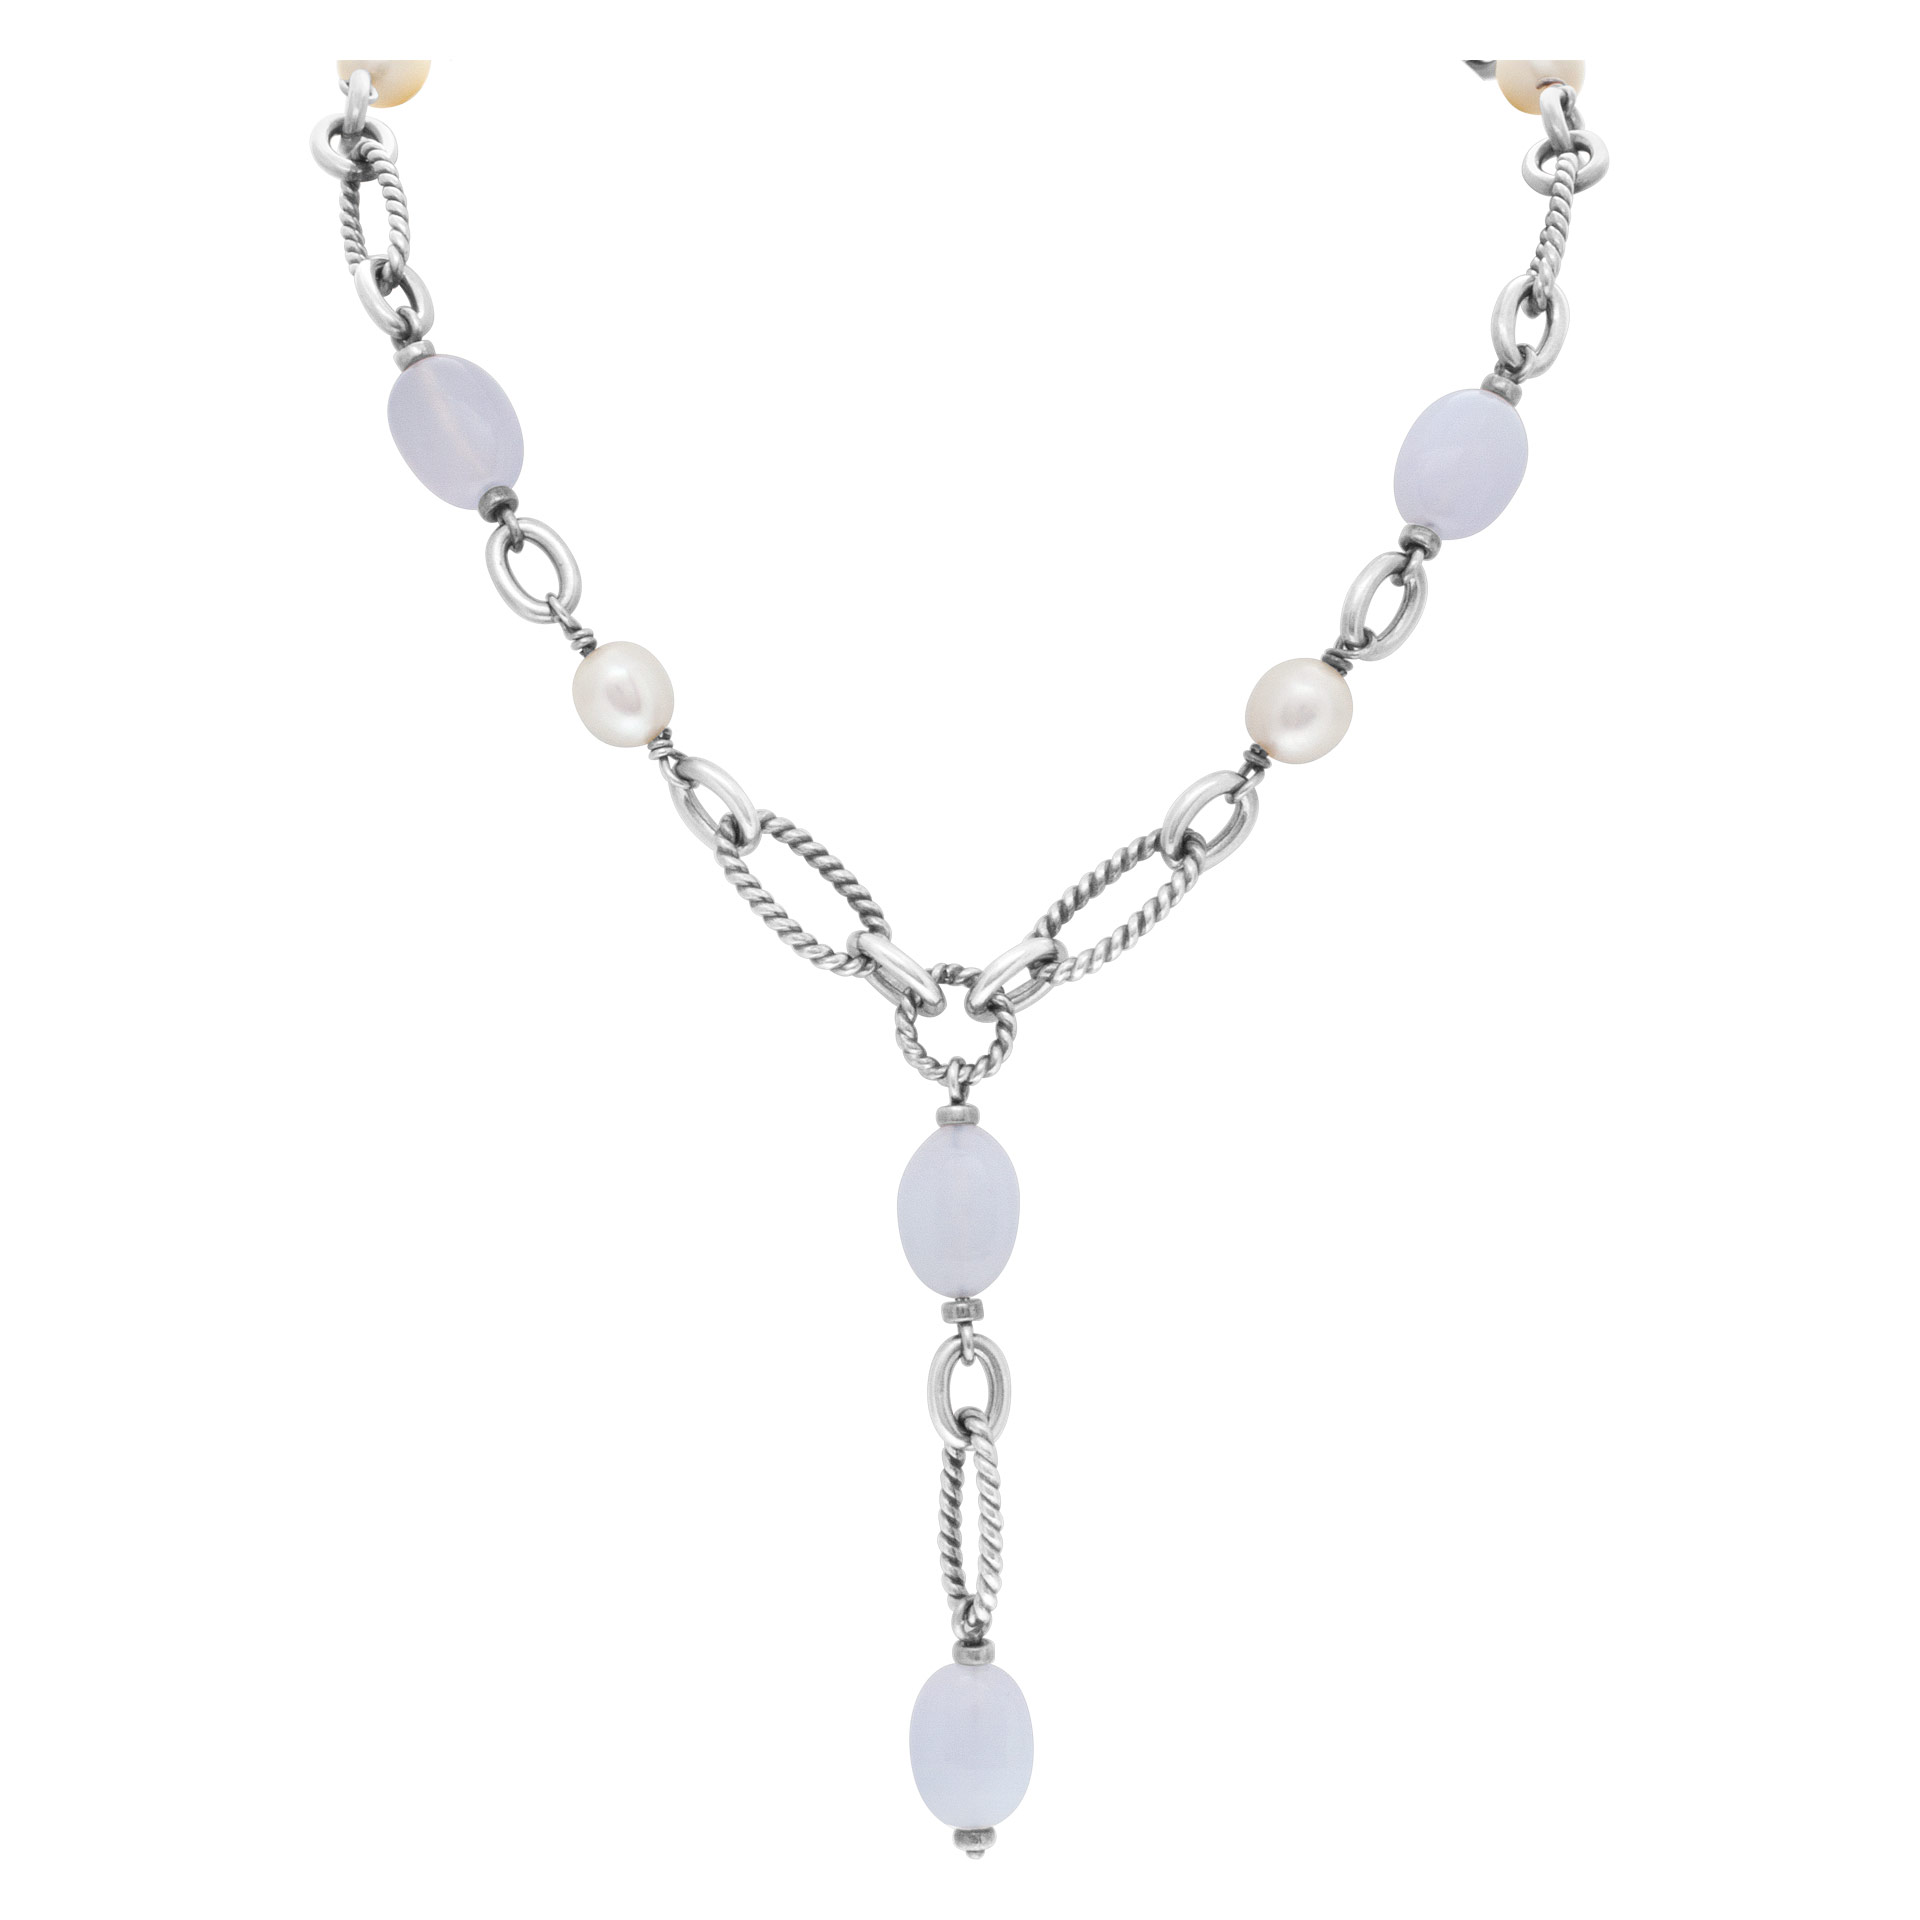 David Yurman figaro link necklace with chalcedony & pearl accents in sterling silver